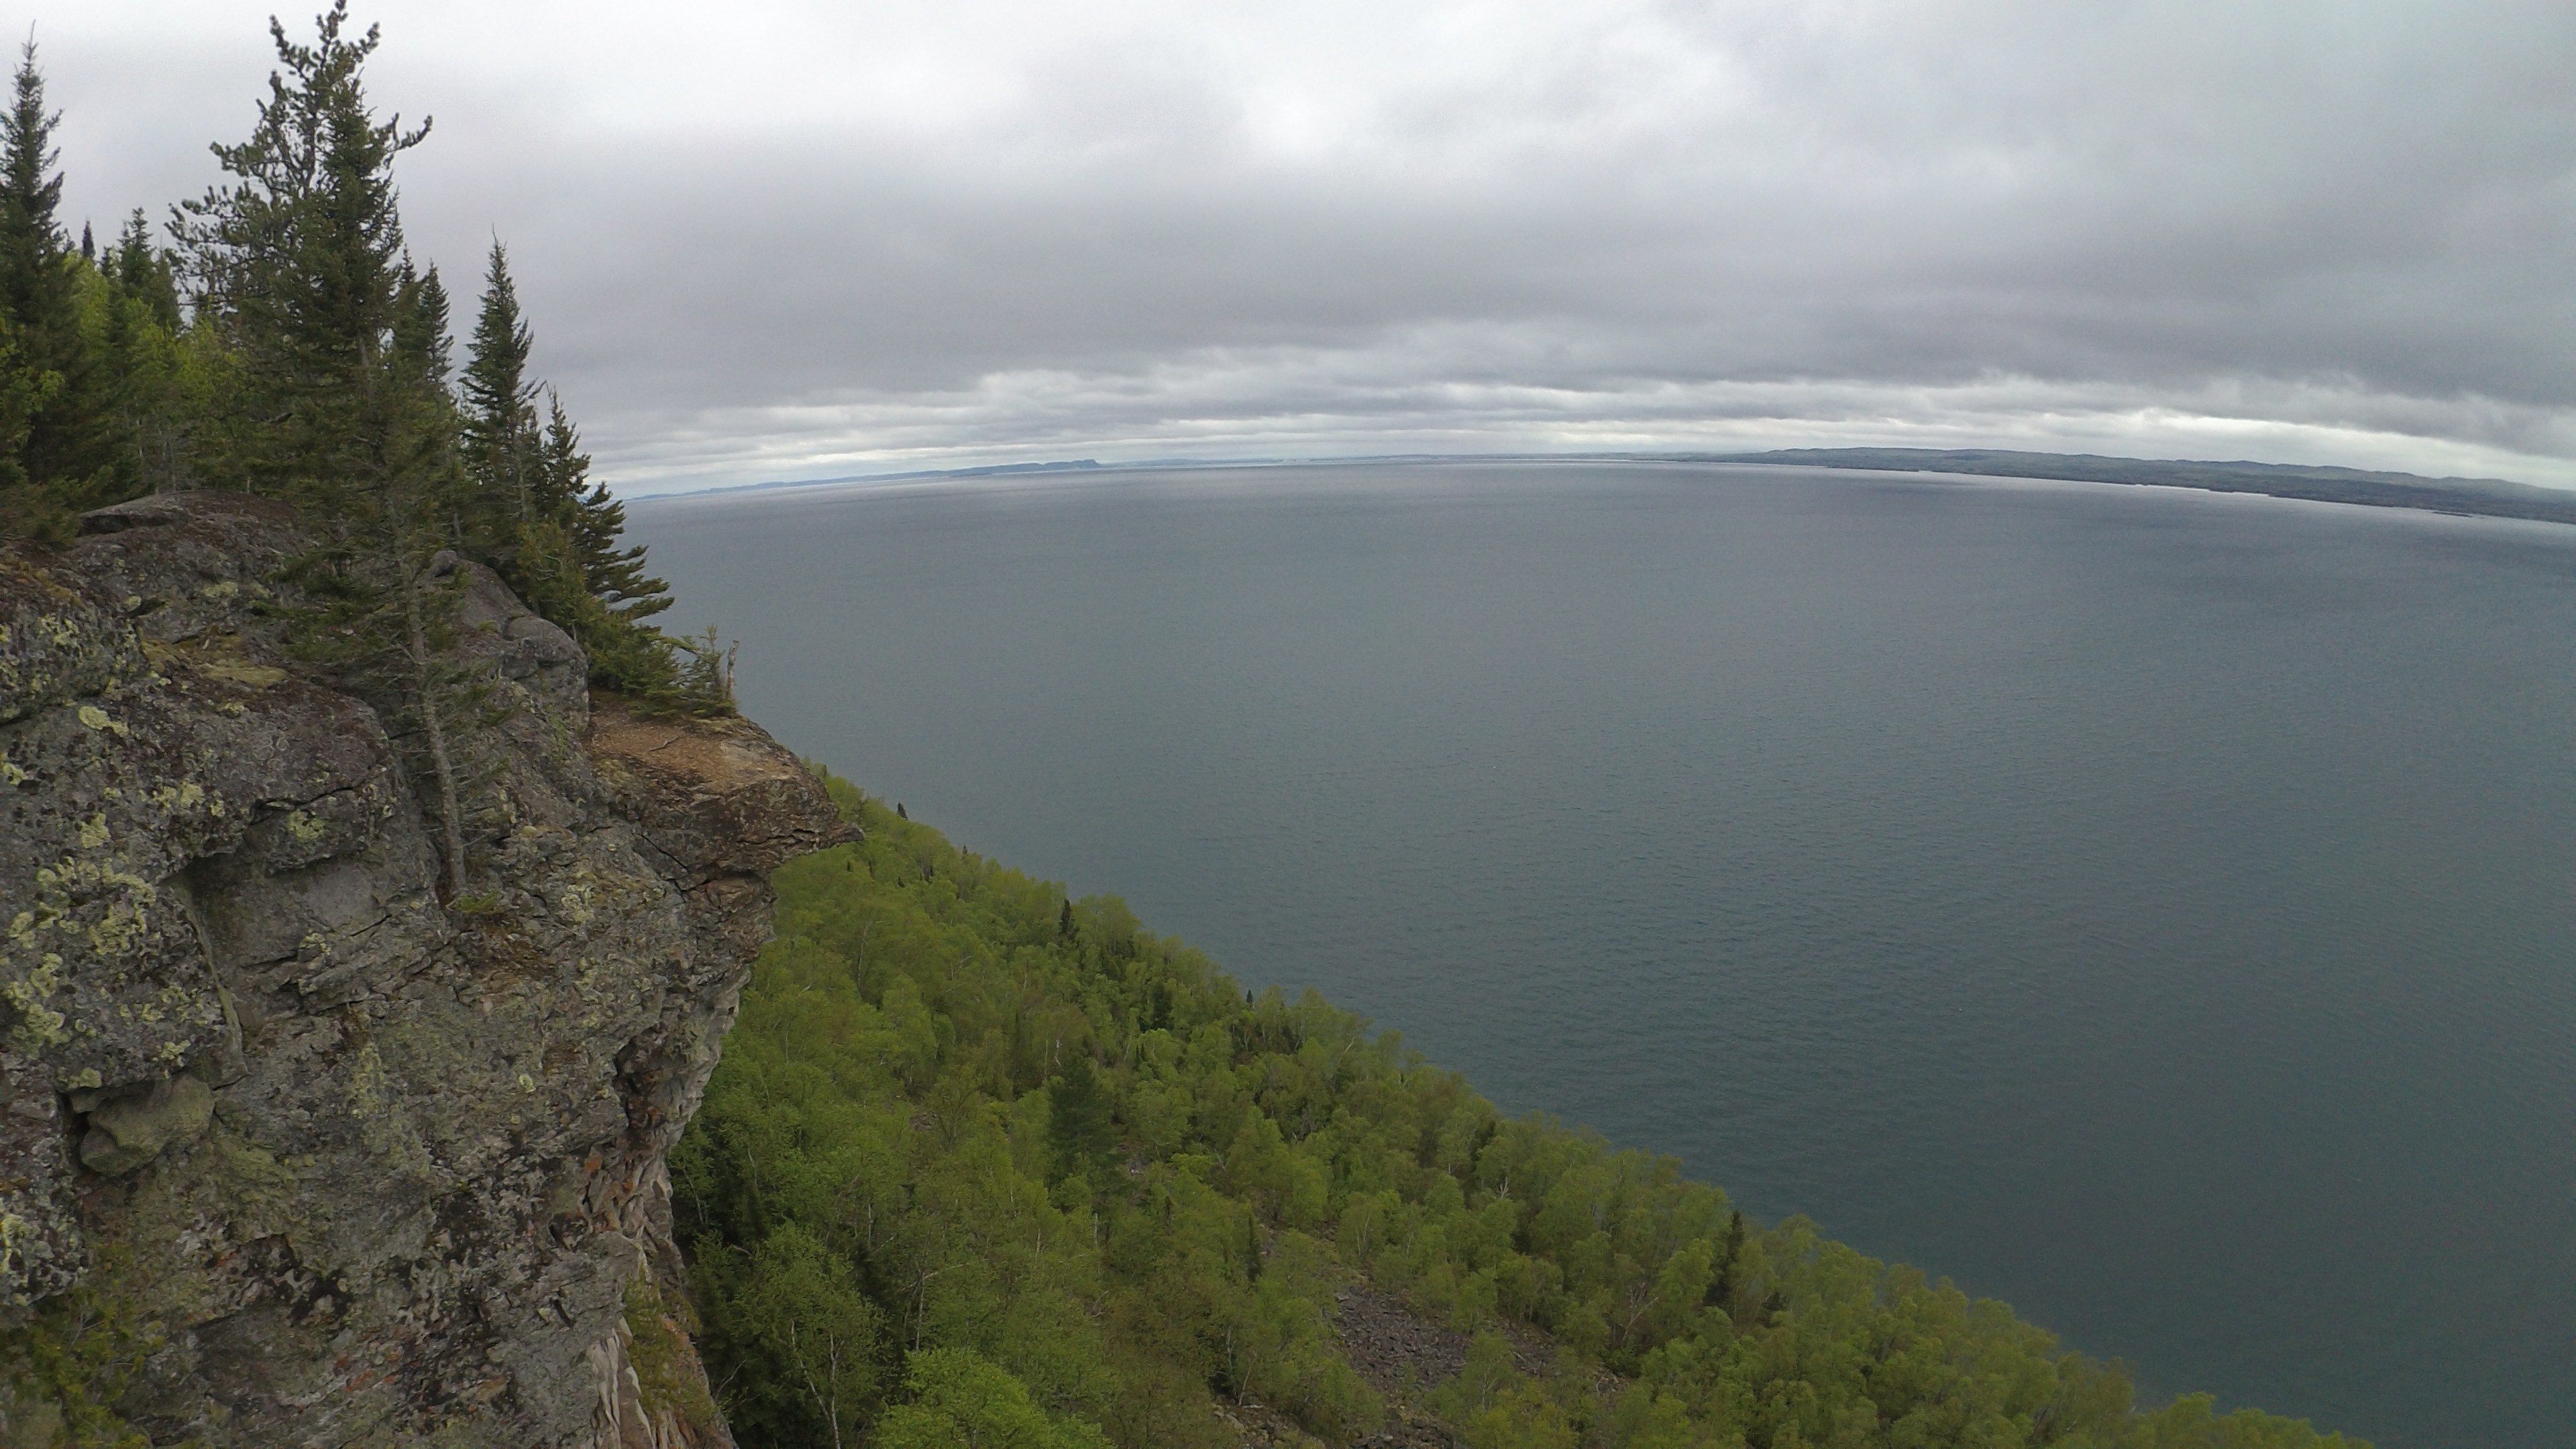 Thunder Bay lookout – Wandering Whites RV